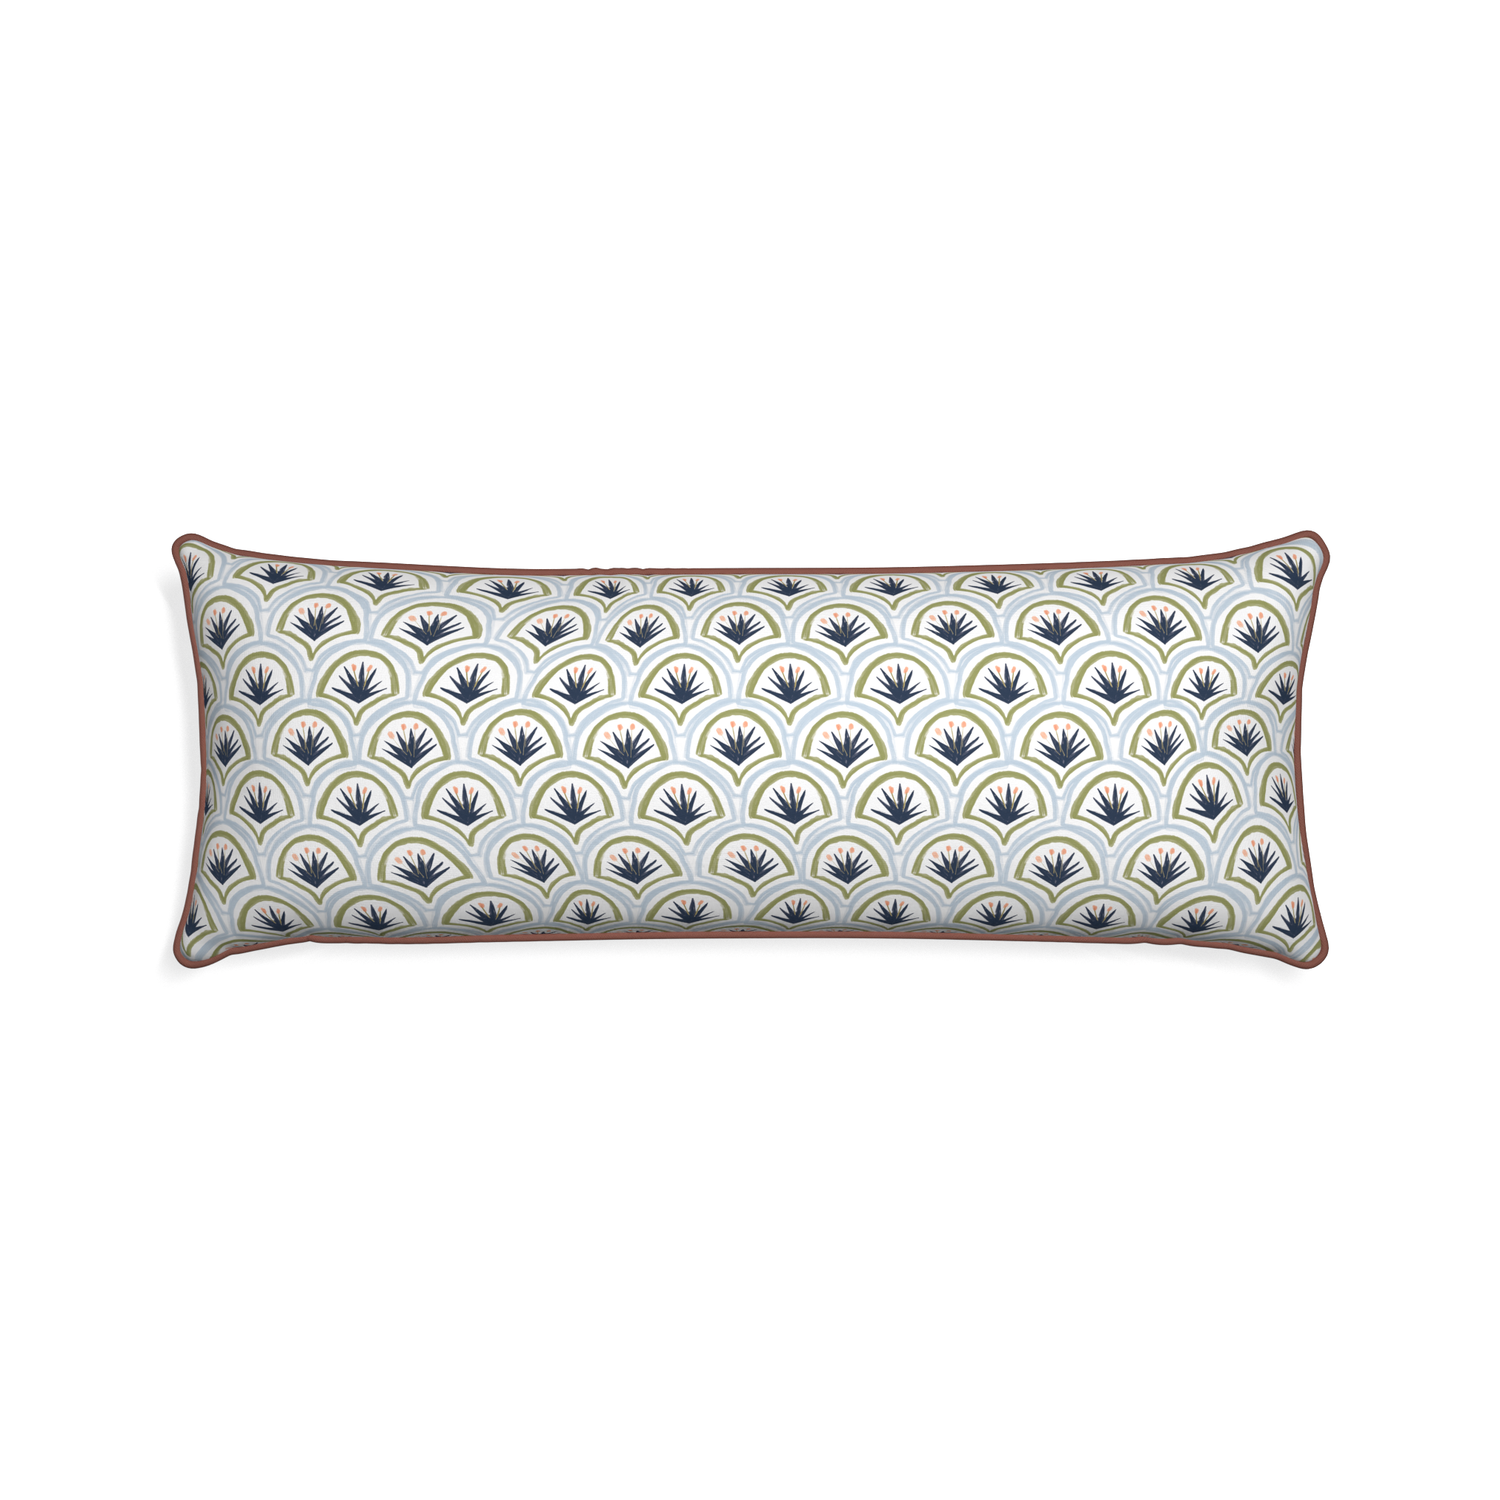 Xl-lumbar thatcher midnight custom art deco palm patternpillow with w piping on white background